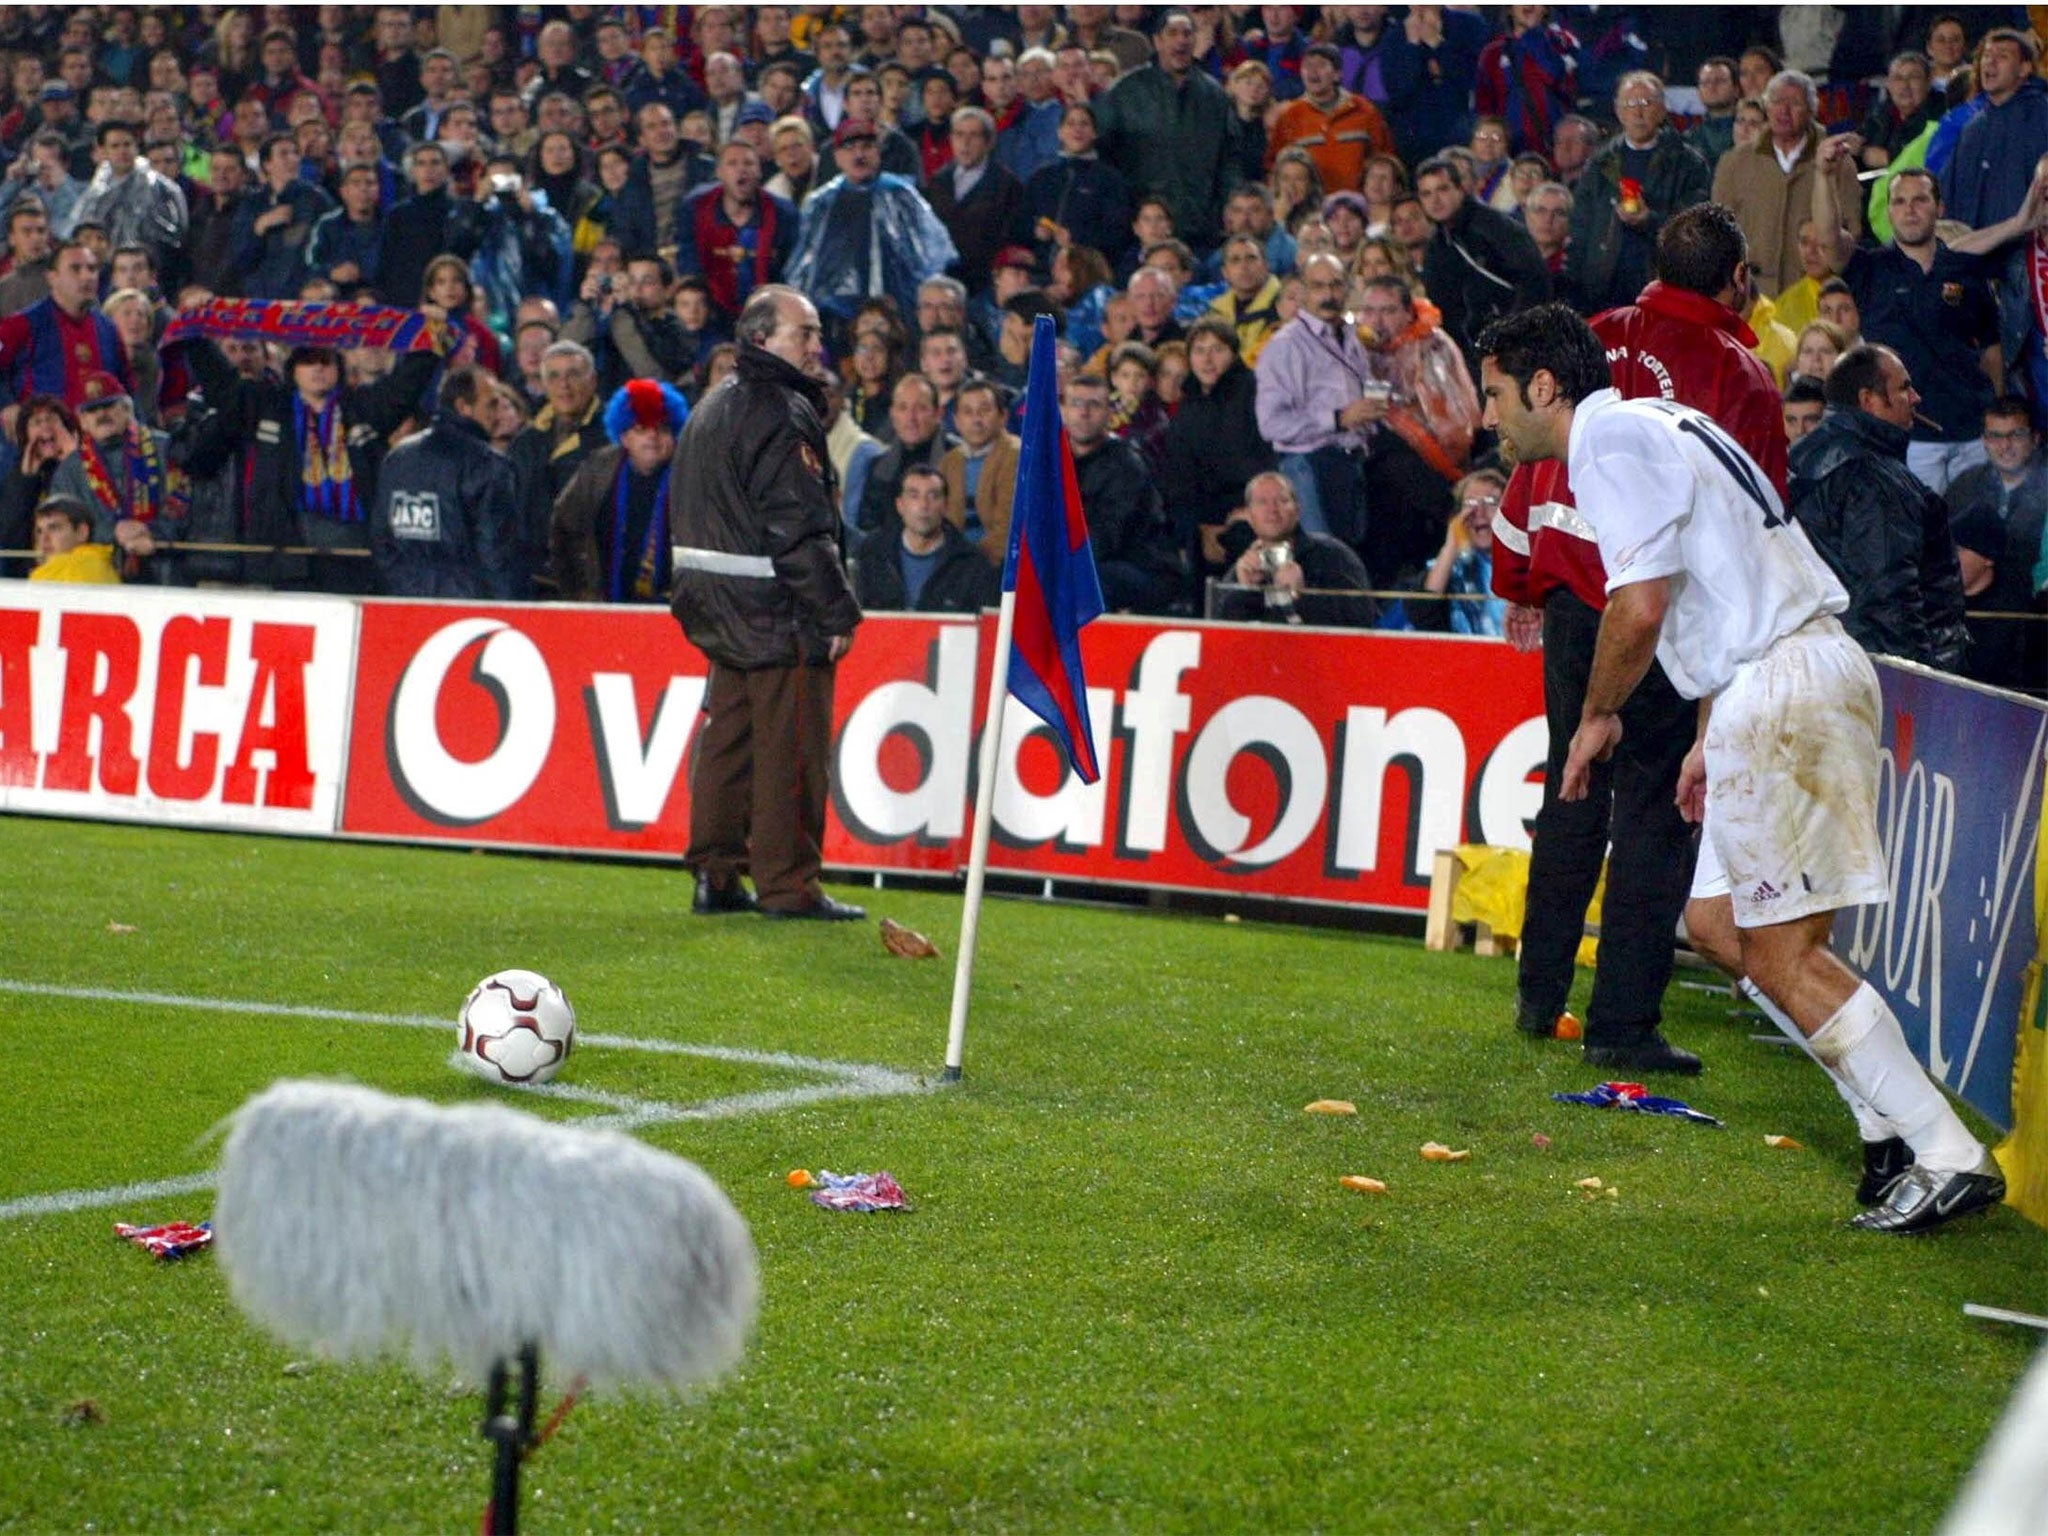 Figo was showered with missiles, including a pig's head, on his return to Barcelona